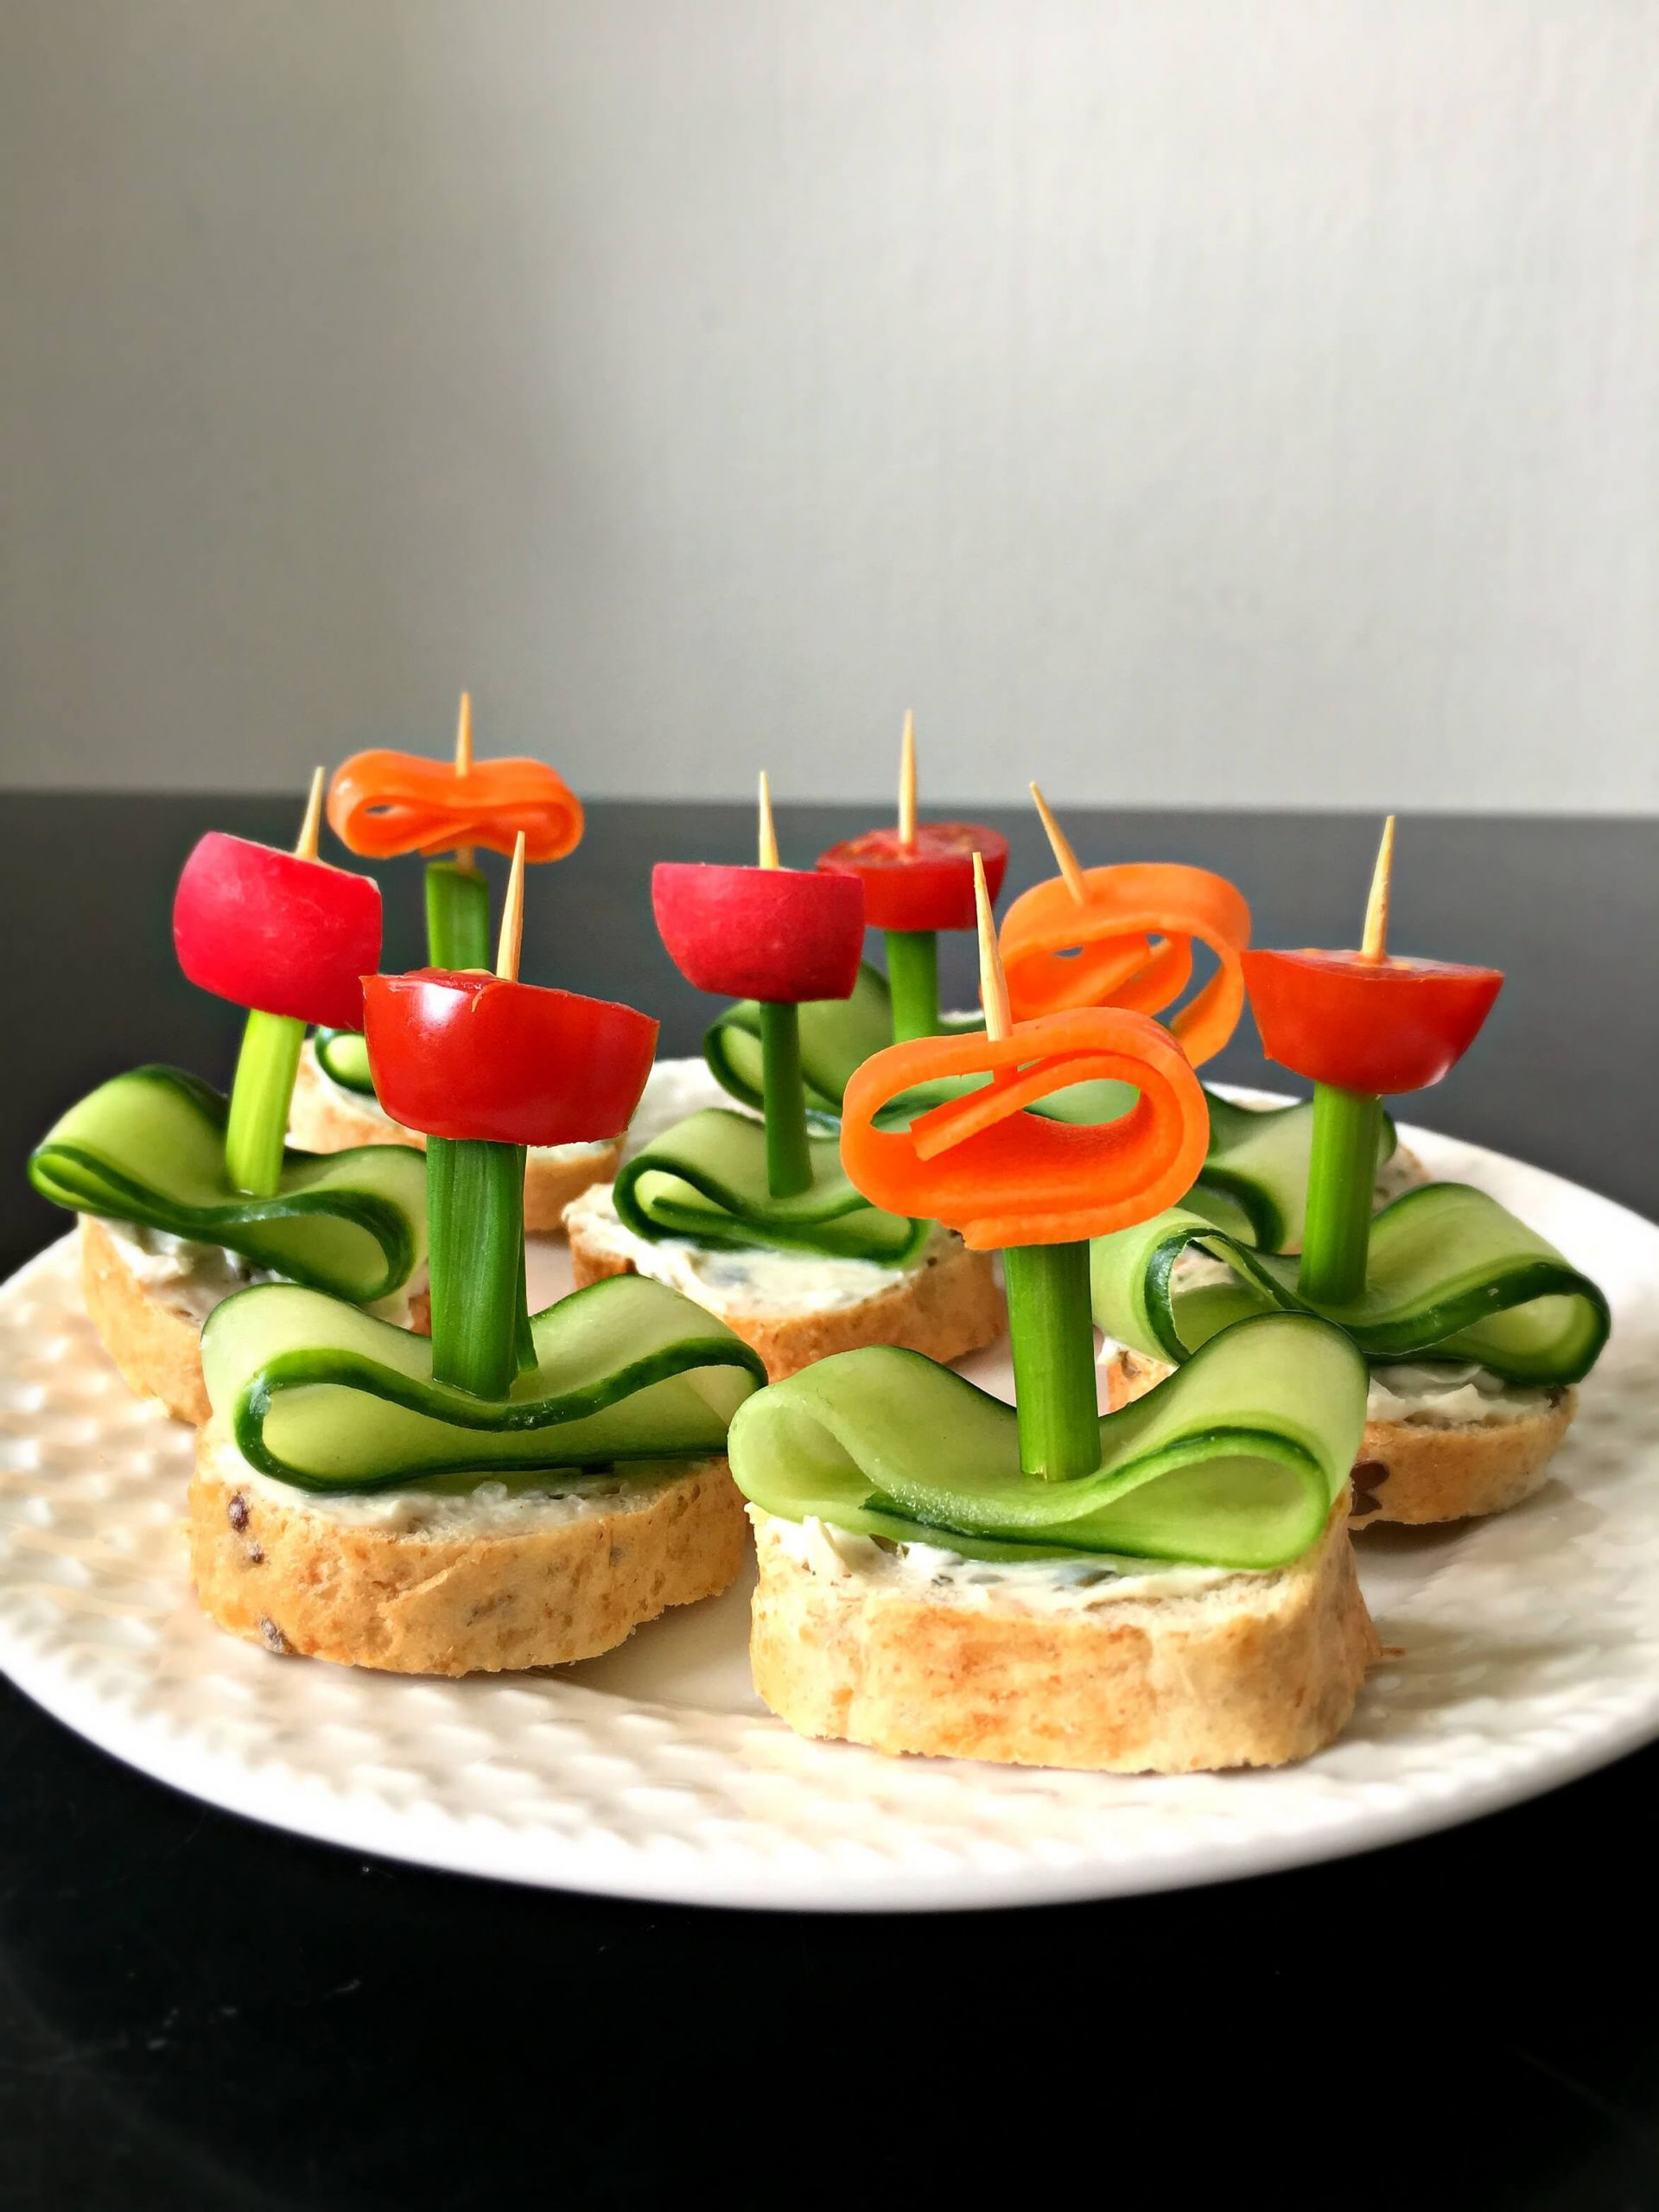 Healthy Appetizers For Kids
 Vegan Flower Appetizers with Herb "Cream Cheese"